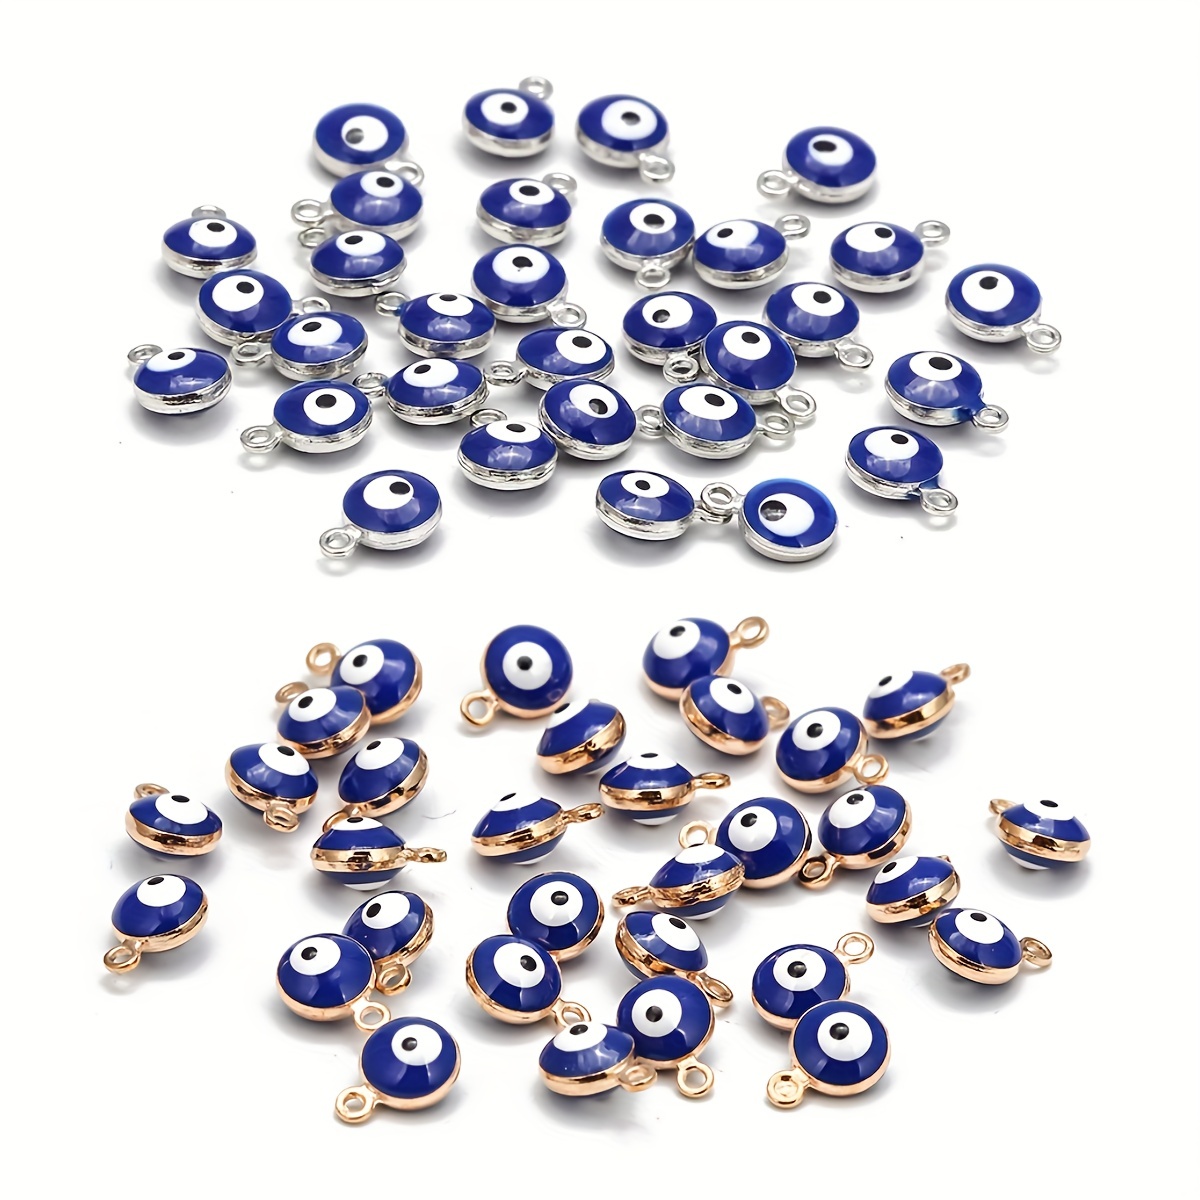 

30pcs/lot Turkey Evil Lucky Eye Creative Golden Beads Metal Tone Charms Connectors For Diy Bracelet Bangle Necklace Earrings Keychain Charms Jewelry Accessories